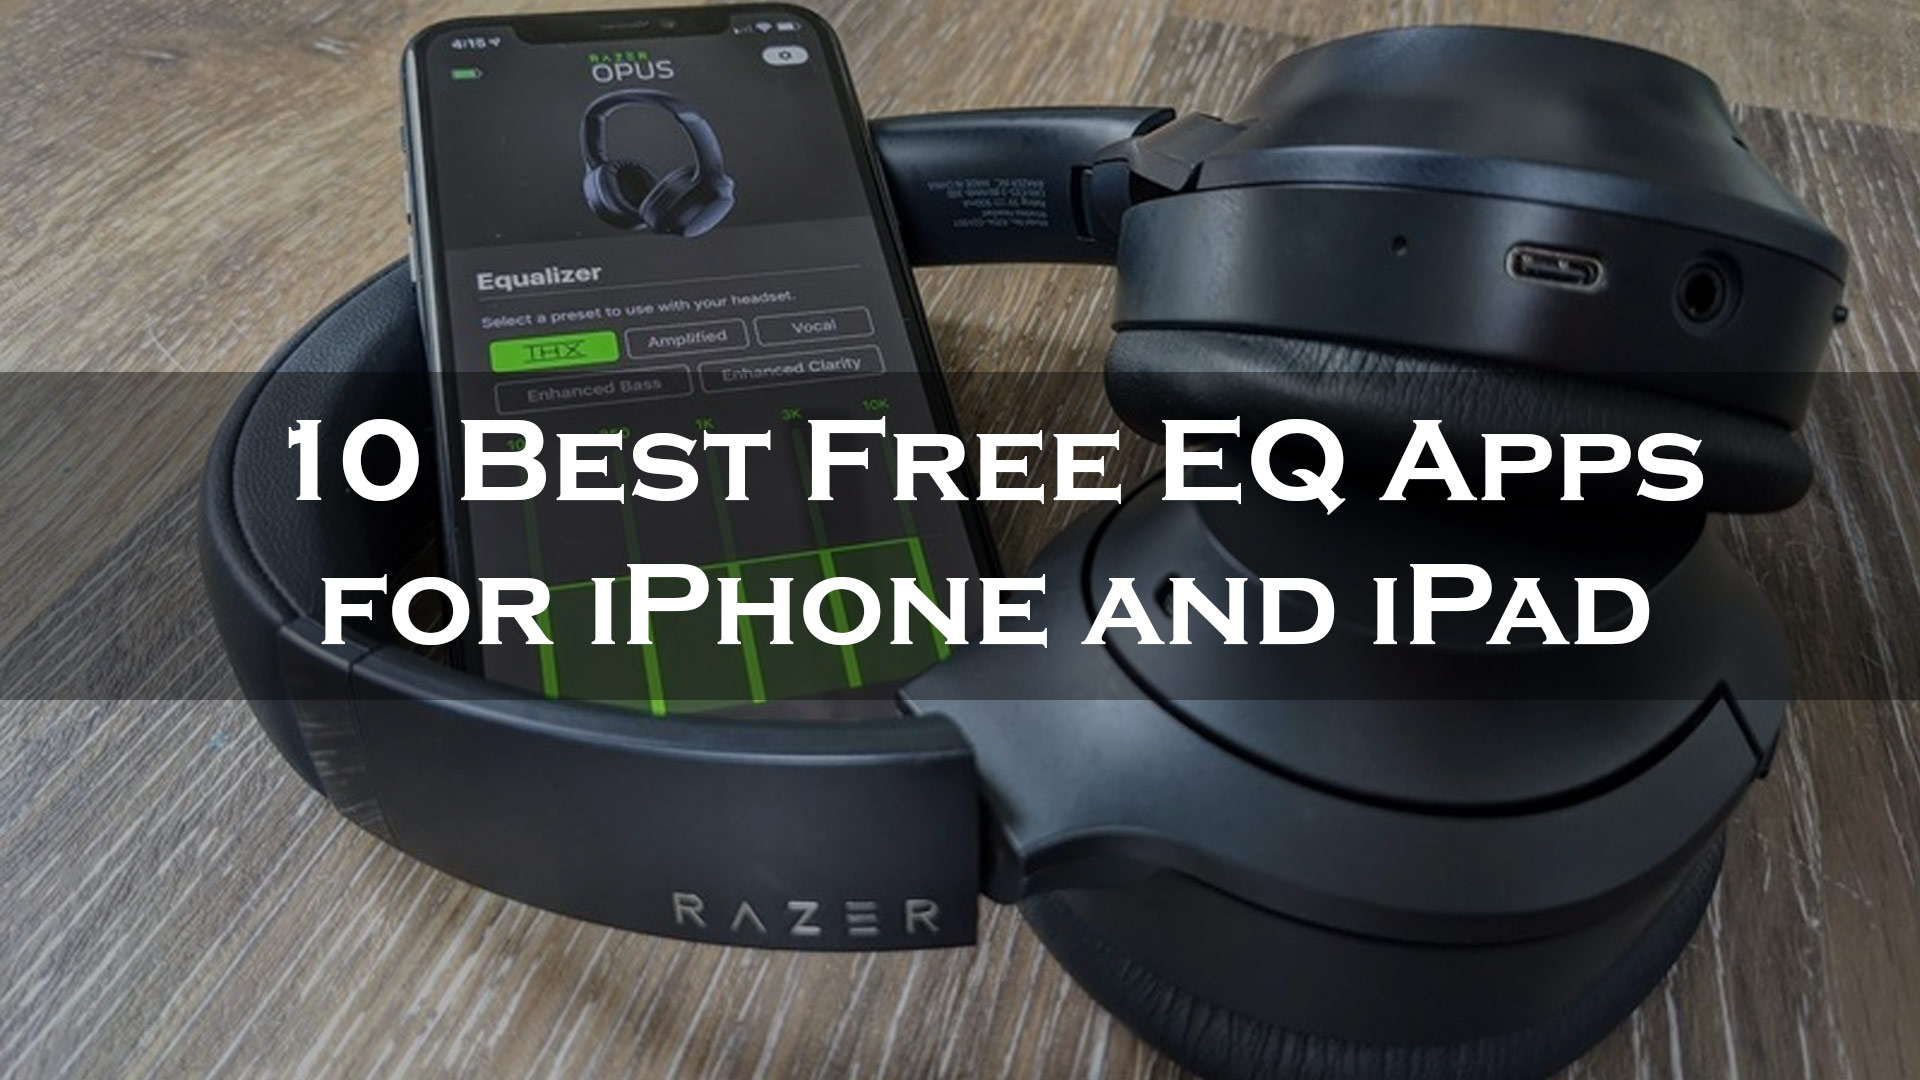 10 Best Free EQ Apps for iPhone and iPad